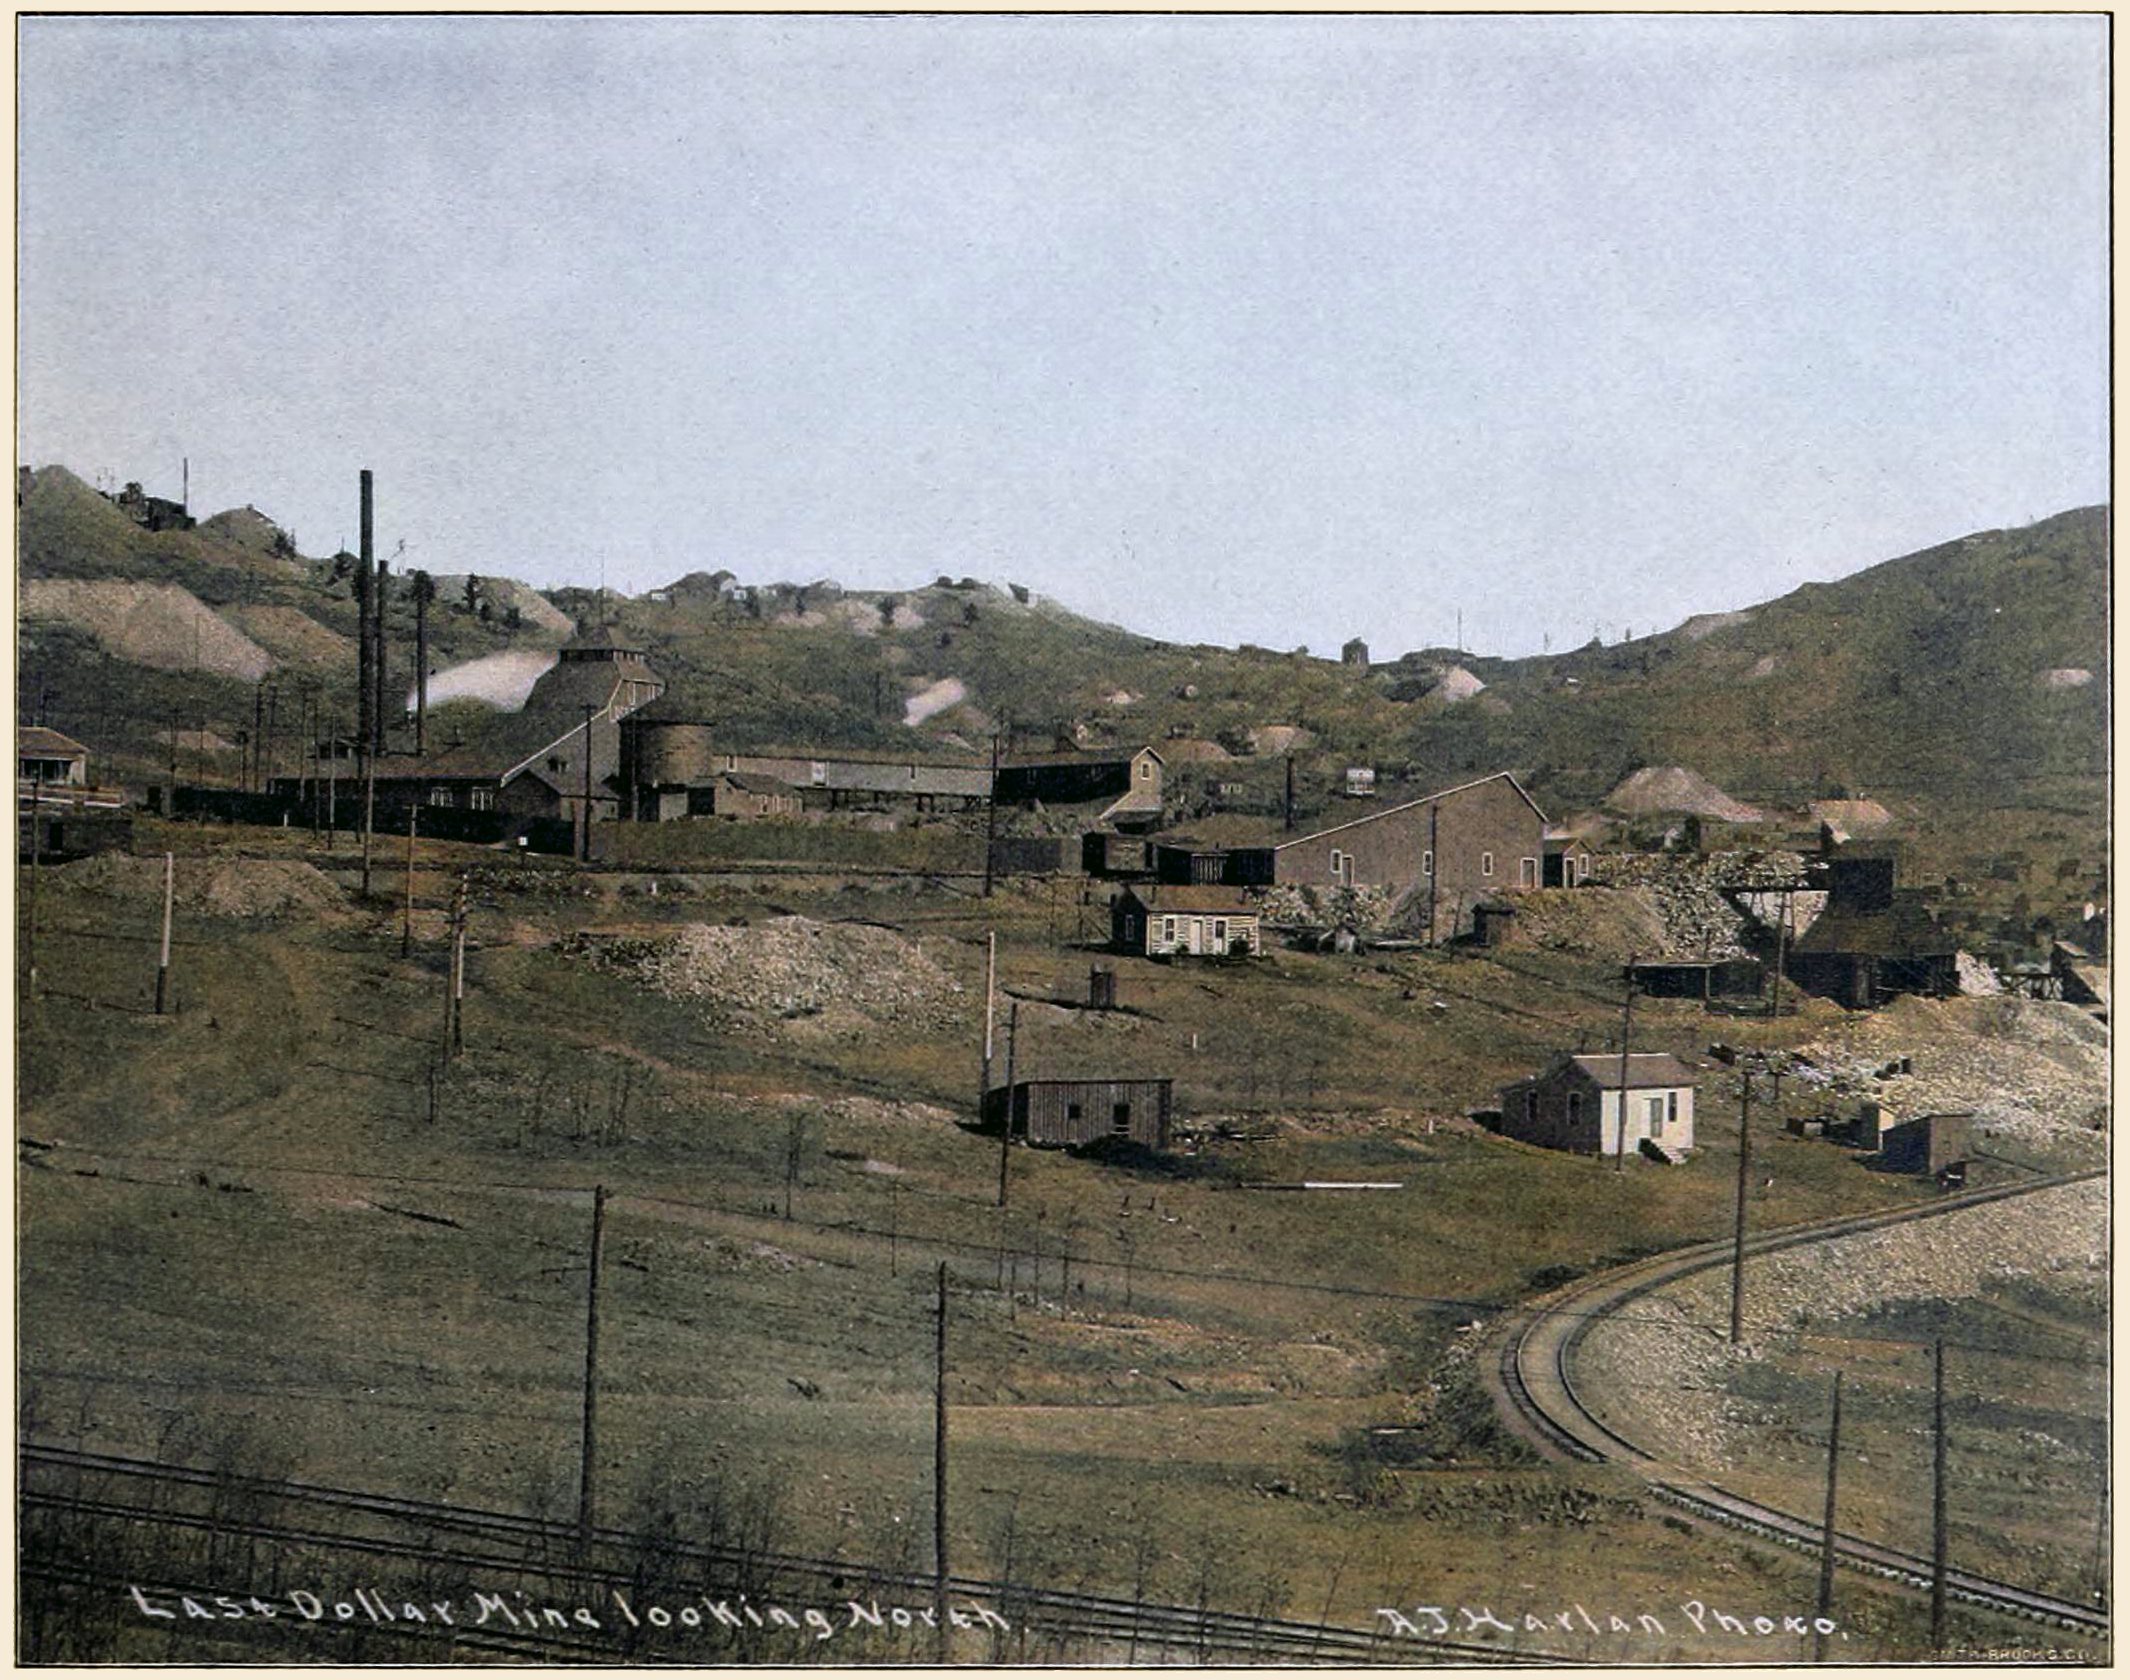 While it is marked with Last Dollar looking North, it also shows part of the Short Line branch track towards Portland/Ajax mine, before it became part of the new High Line that went around of Goldfield, and the original High Line trolley line runs in the foreground showing part of a junction and spur track leading into Dyer Station, outside the view at left.
   Also, in the extreme foreground, the 3-ft narrow gauge track of a sidetrack of the Golden Circle can been seen, going towards what would later become the Portland Mill location. Then, about middle of photo, there stands a F. & C.C. boxcar up on the track passing by the Last Dollar mine.
   In addition, there are quite a few structures around providing good modeling inspiration! I did procure the colored image used; source had a gray-tone image.